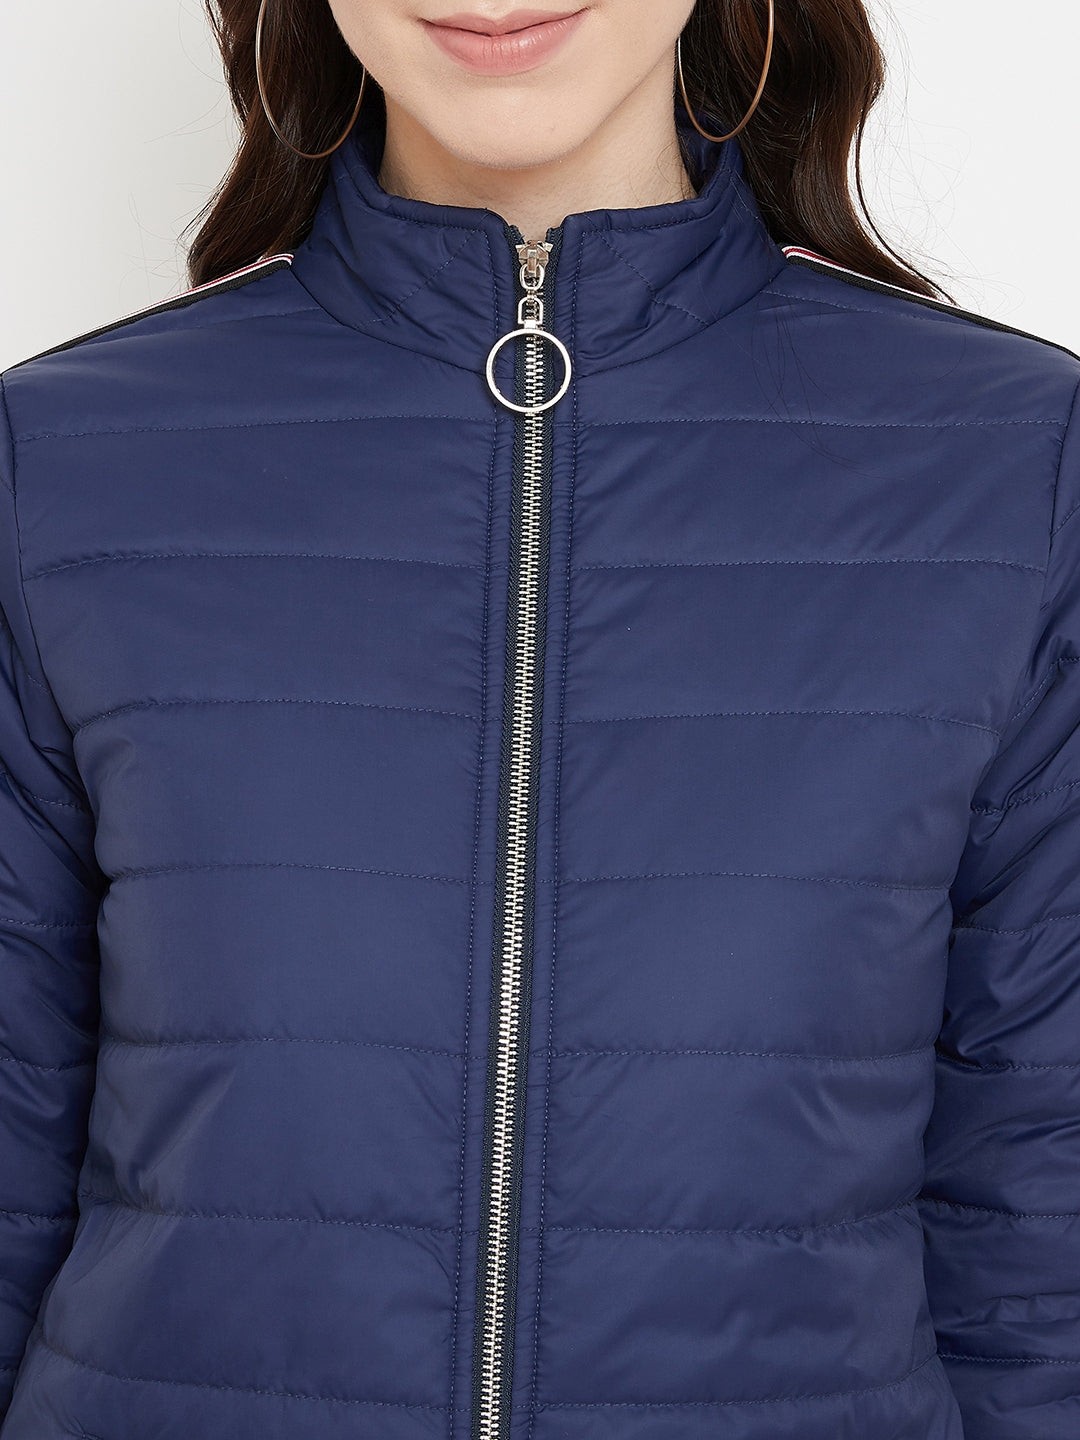 Austin Wood Women's Navy Blue Solid Full Sleeves High Neck Padded Jacket With Size Tape